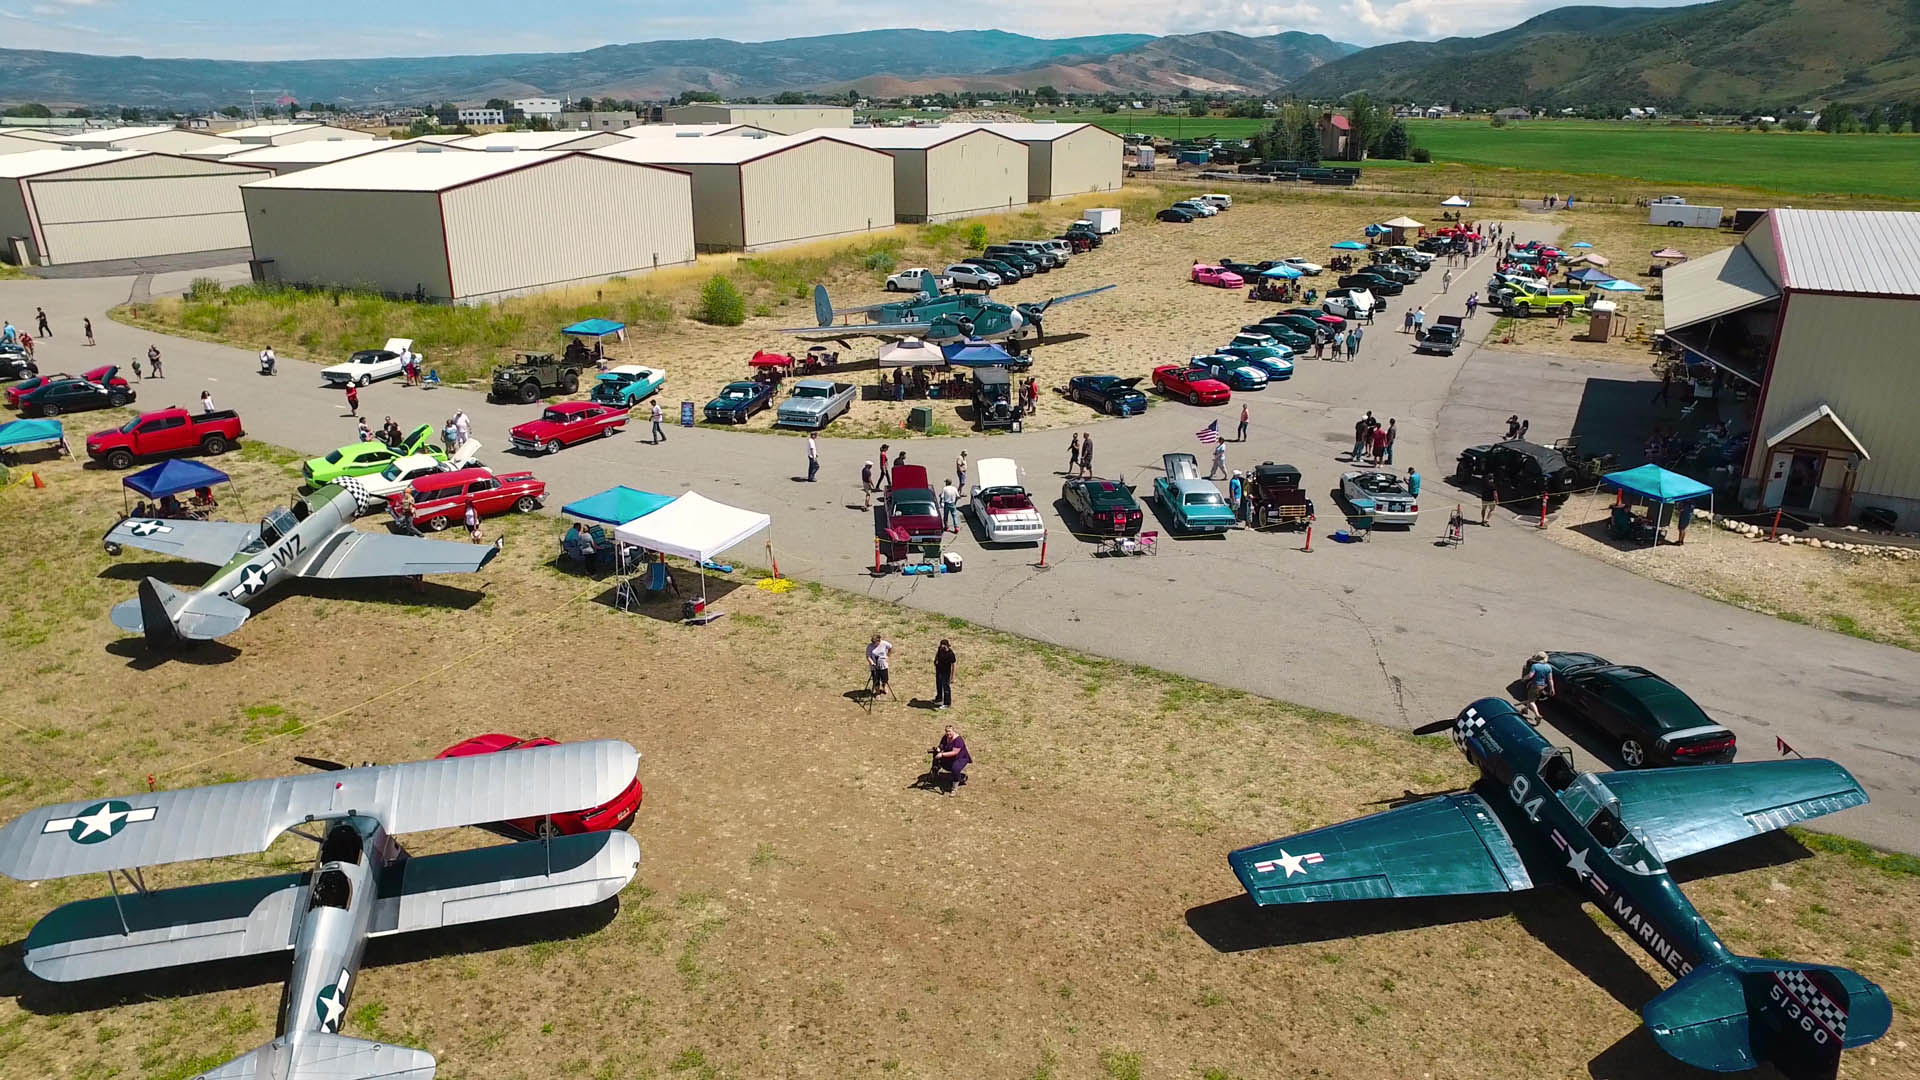 Aerial shot of vintage cars and airplanes at Heber Airport